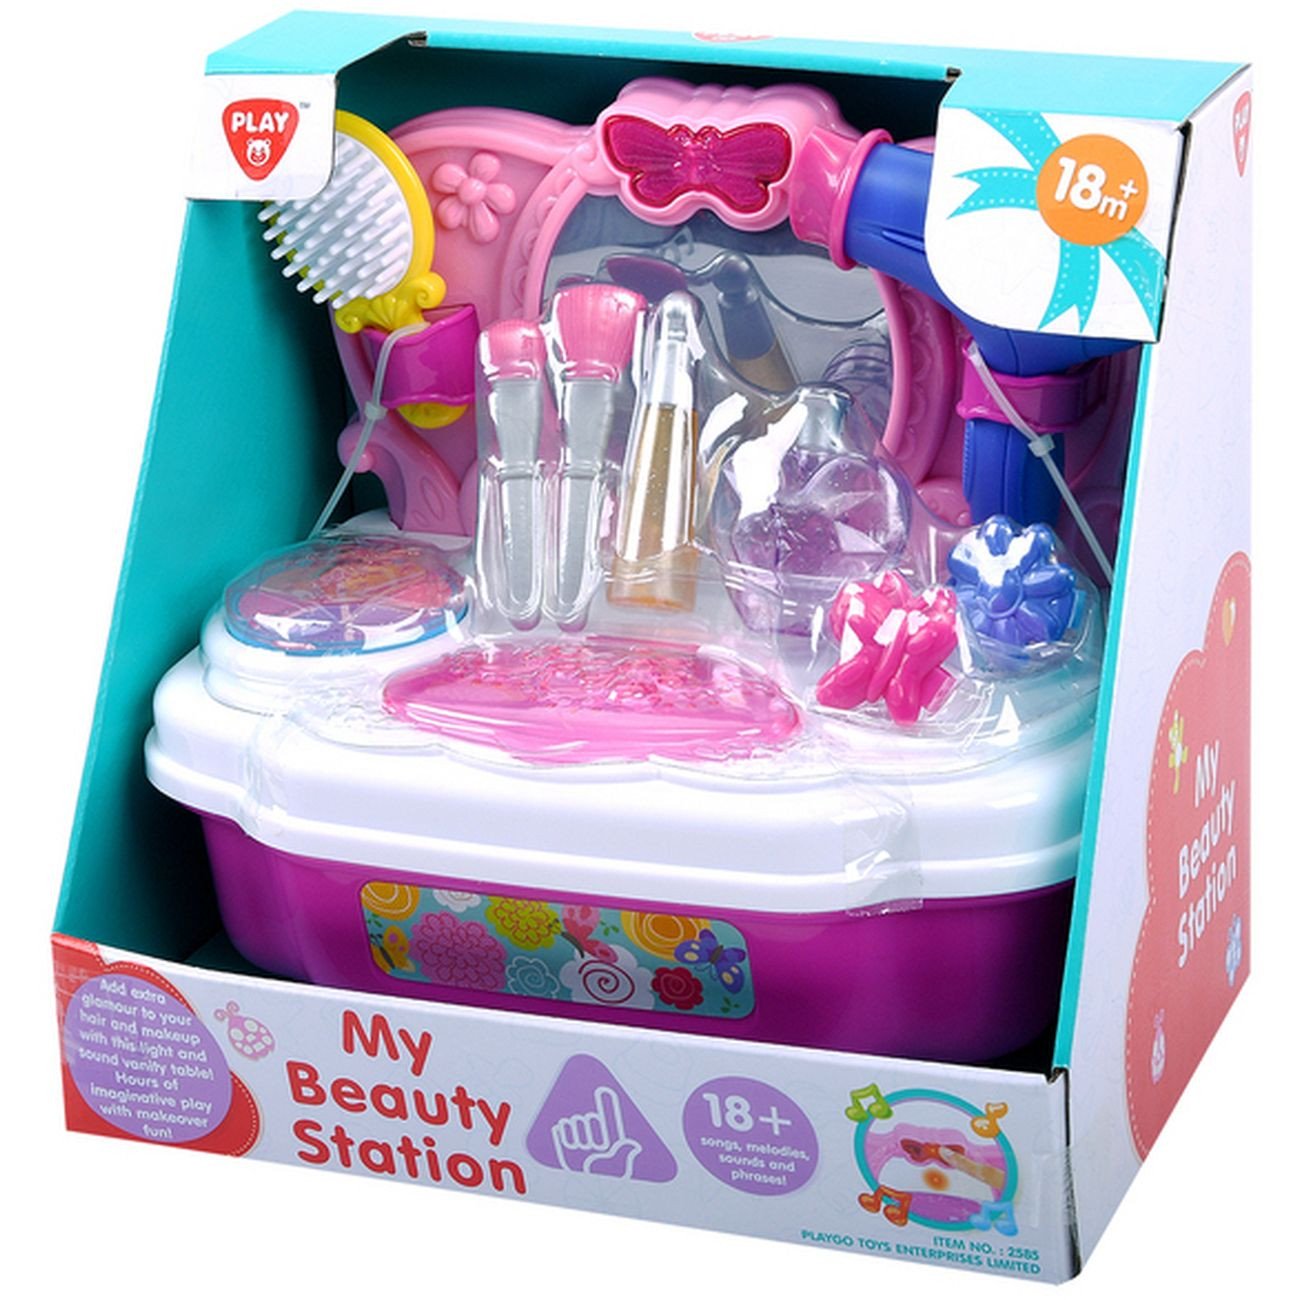 PLAYGO MY BEAUTY STATION BATTERY OPERATED